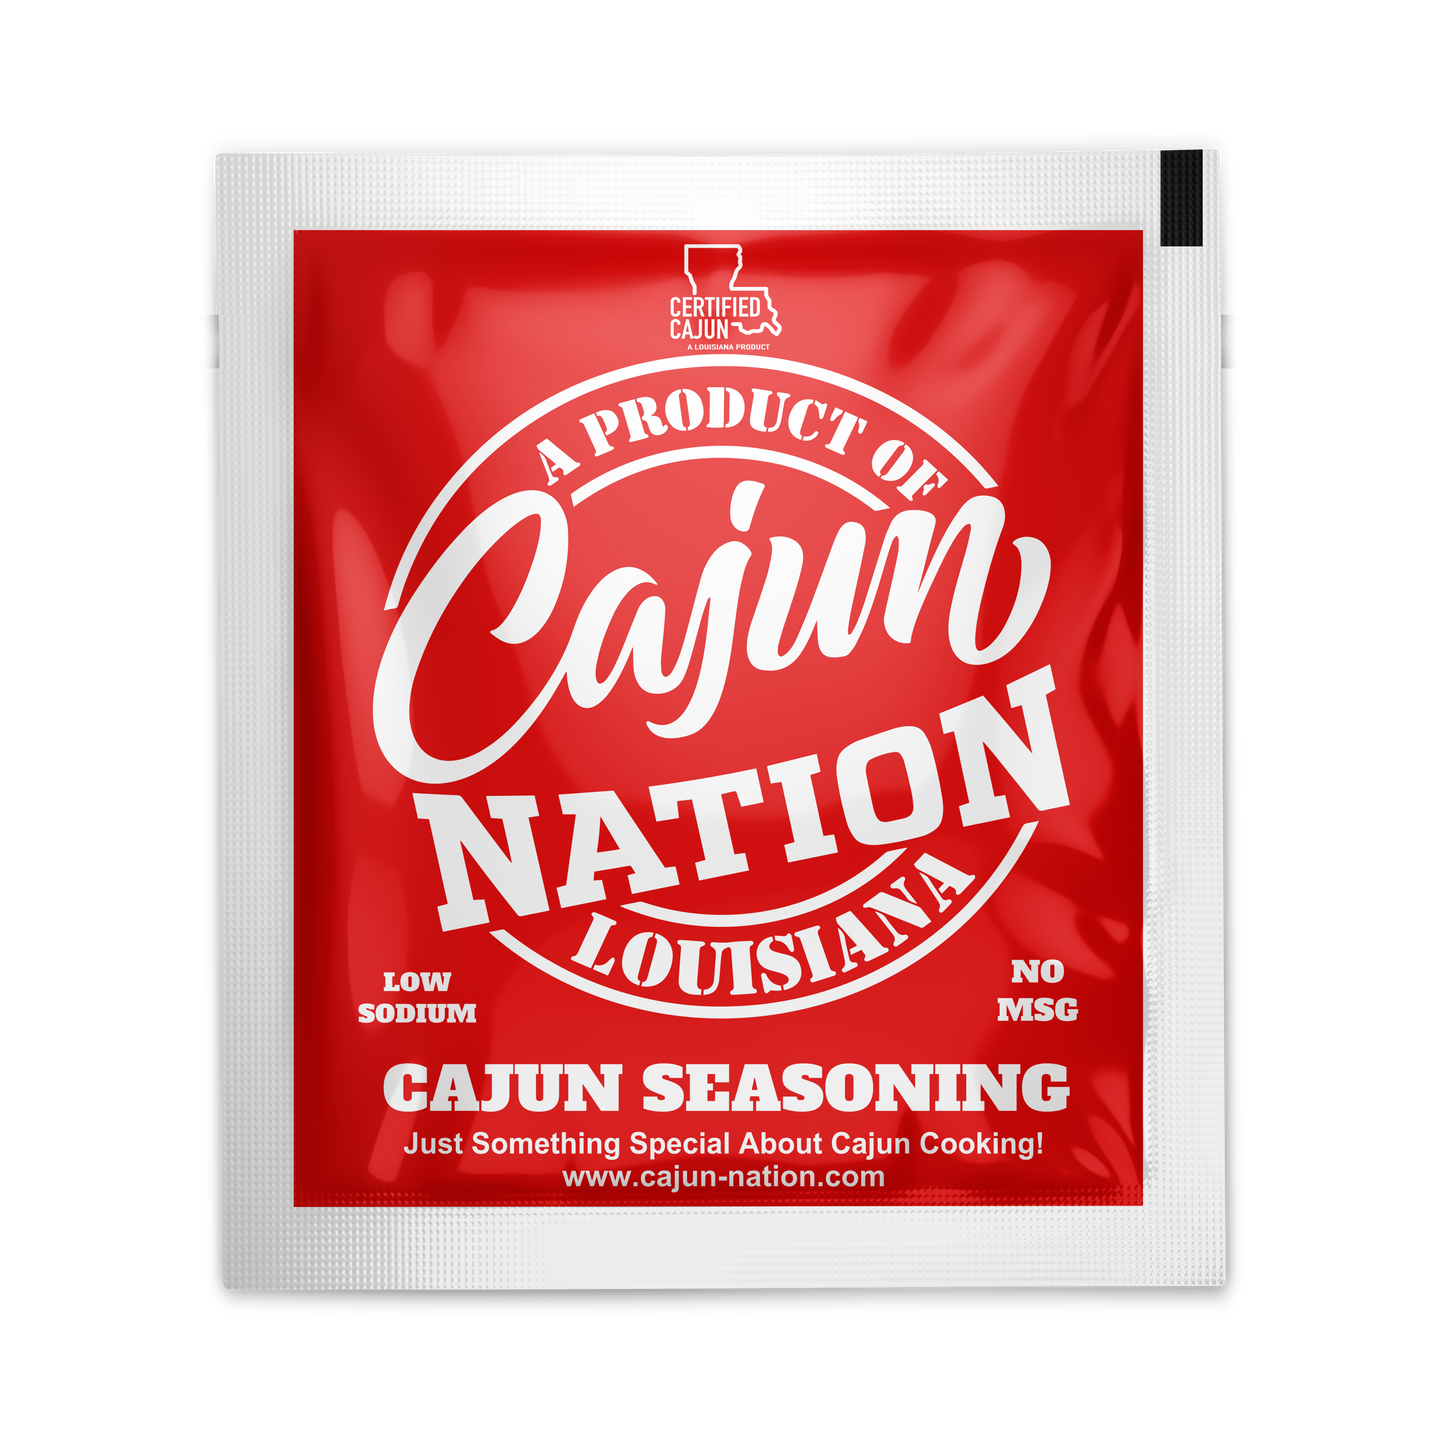 Cajun Nation Seasoning Packets are a Certified Cajun flavorful blend of Cajun Spices with No MSG and Gluten Free.  Made in Cajun Nation, Louisiana along the Cajun Coast. 